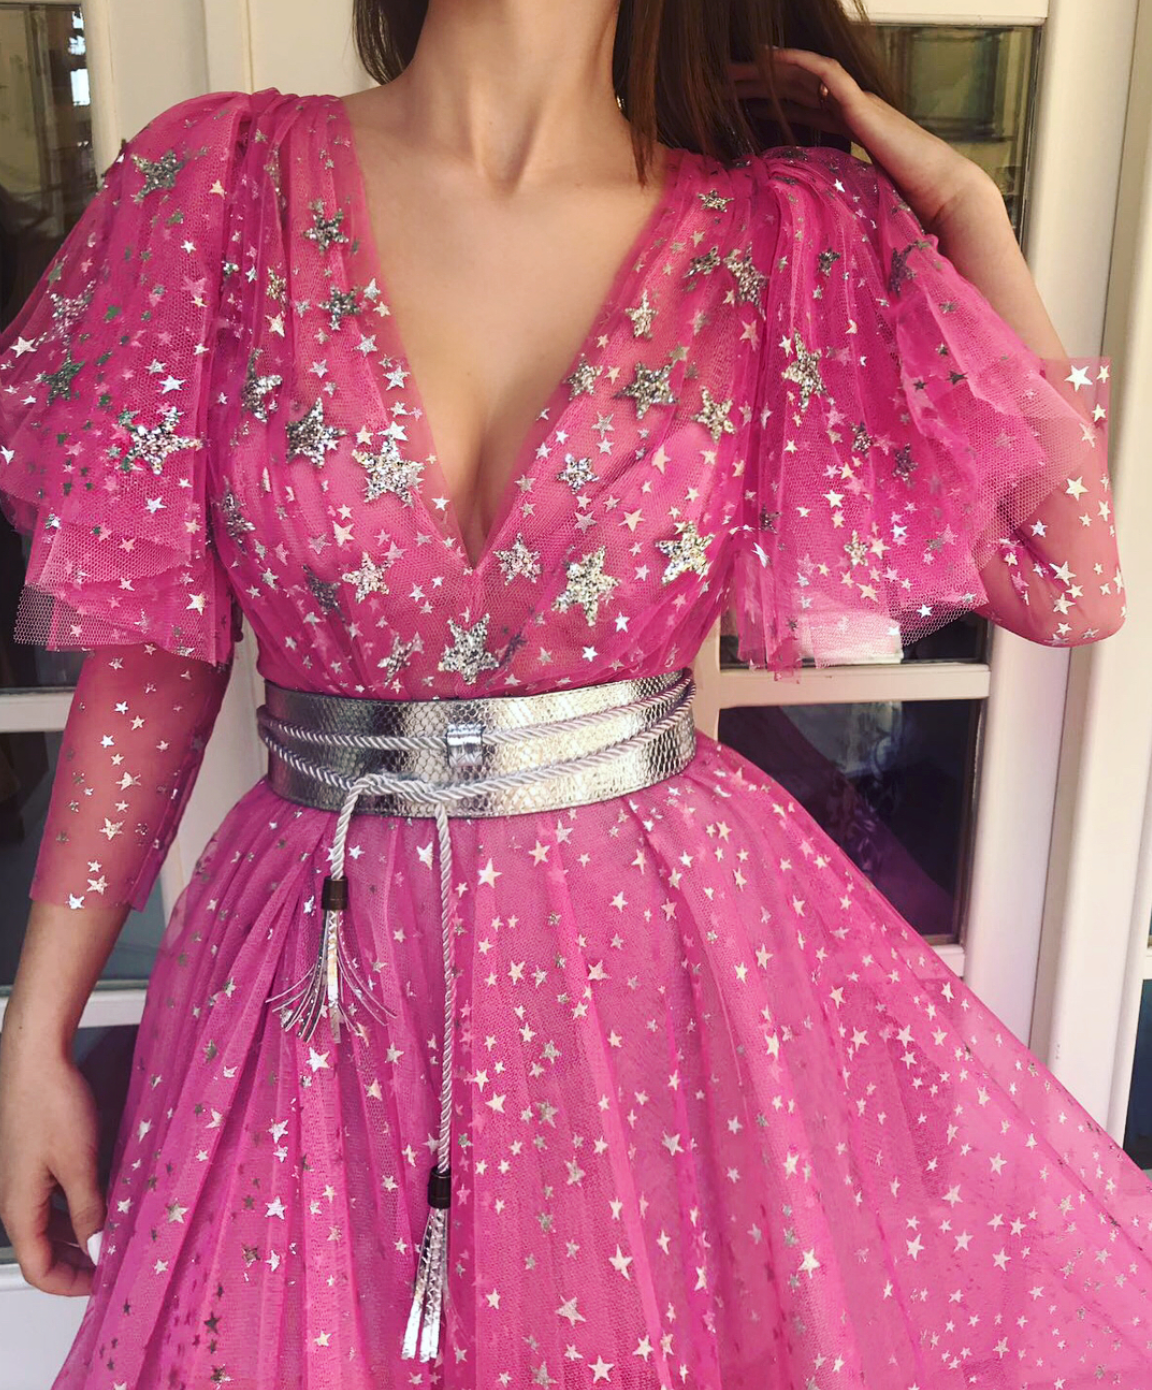 Pink A-Line dress with long sleeves, v-neck, belt and starry fabric